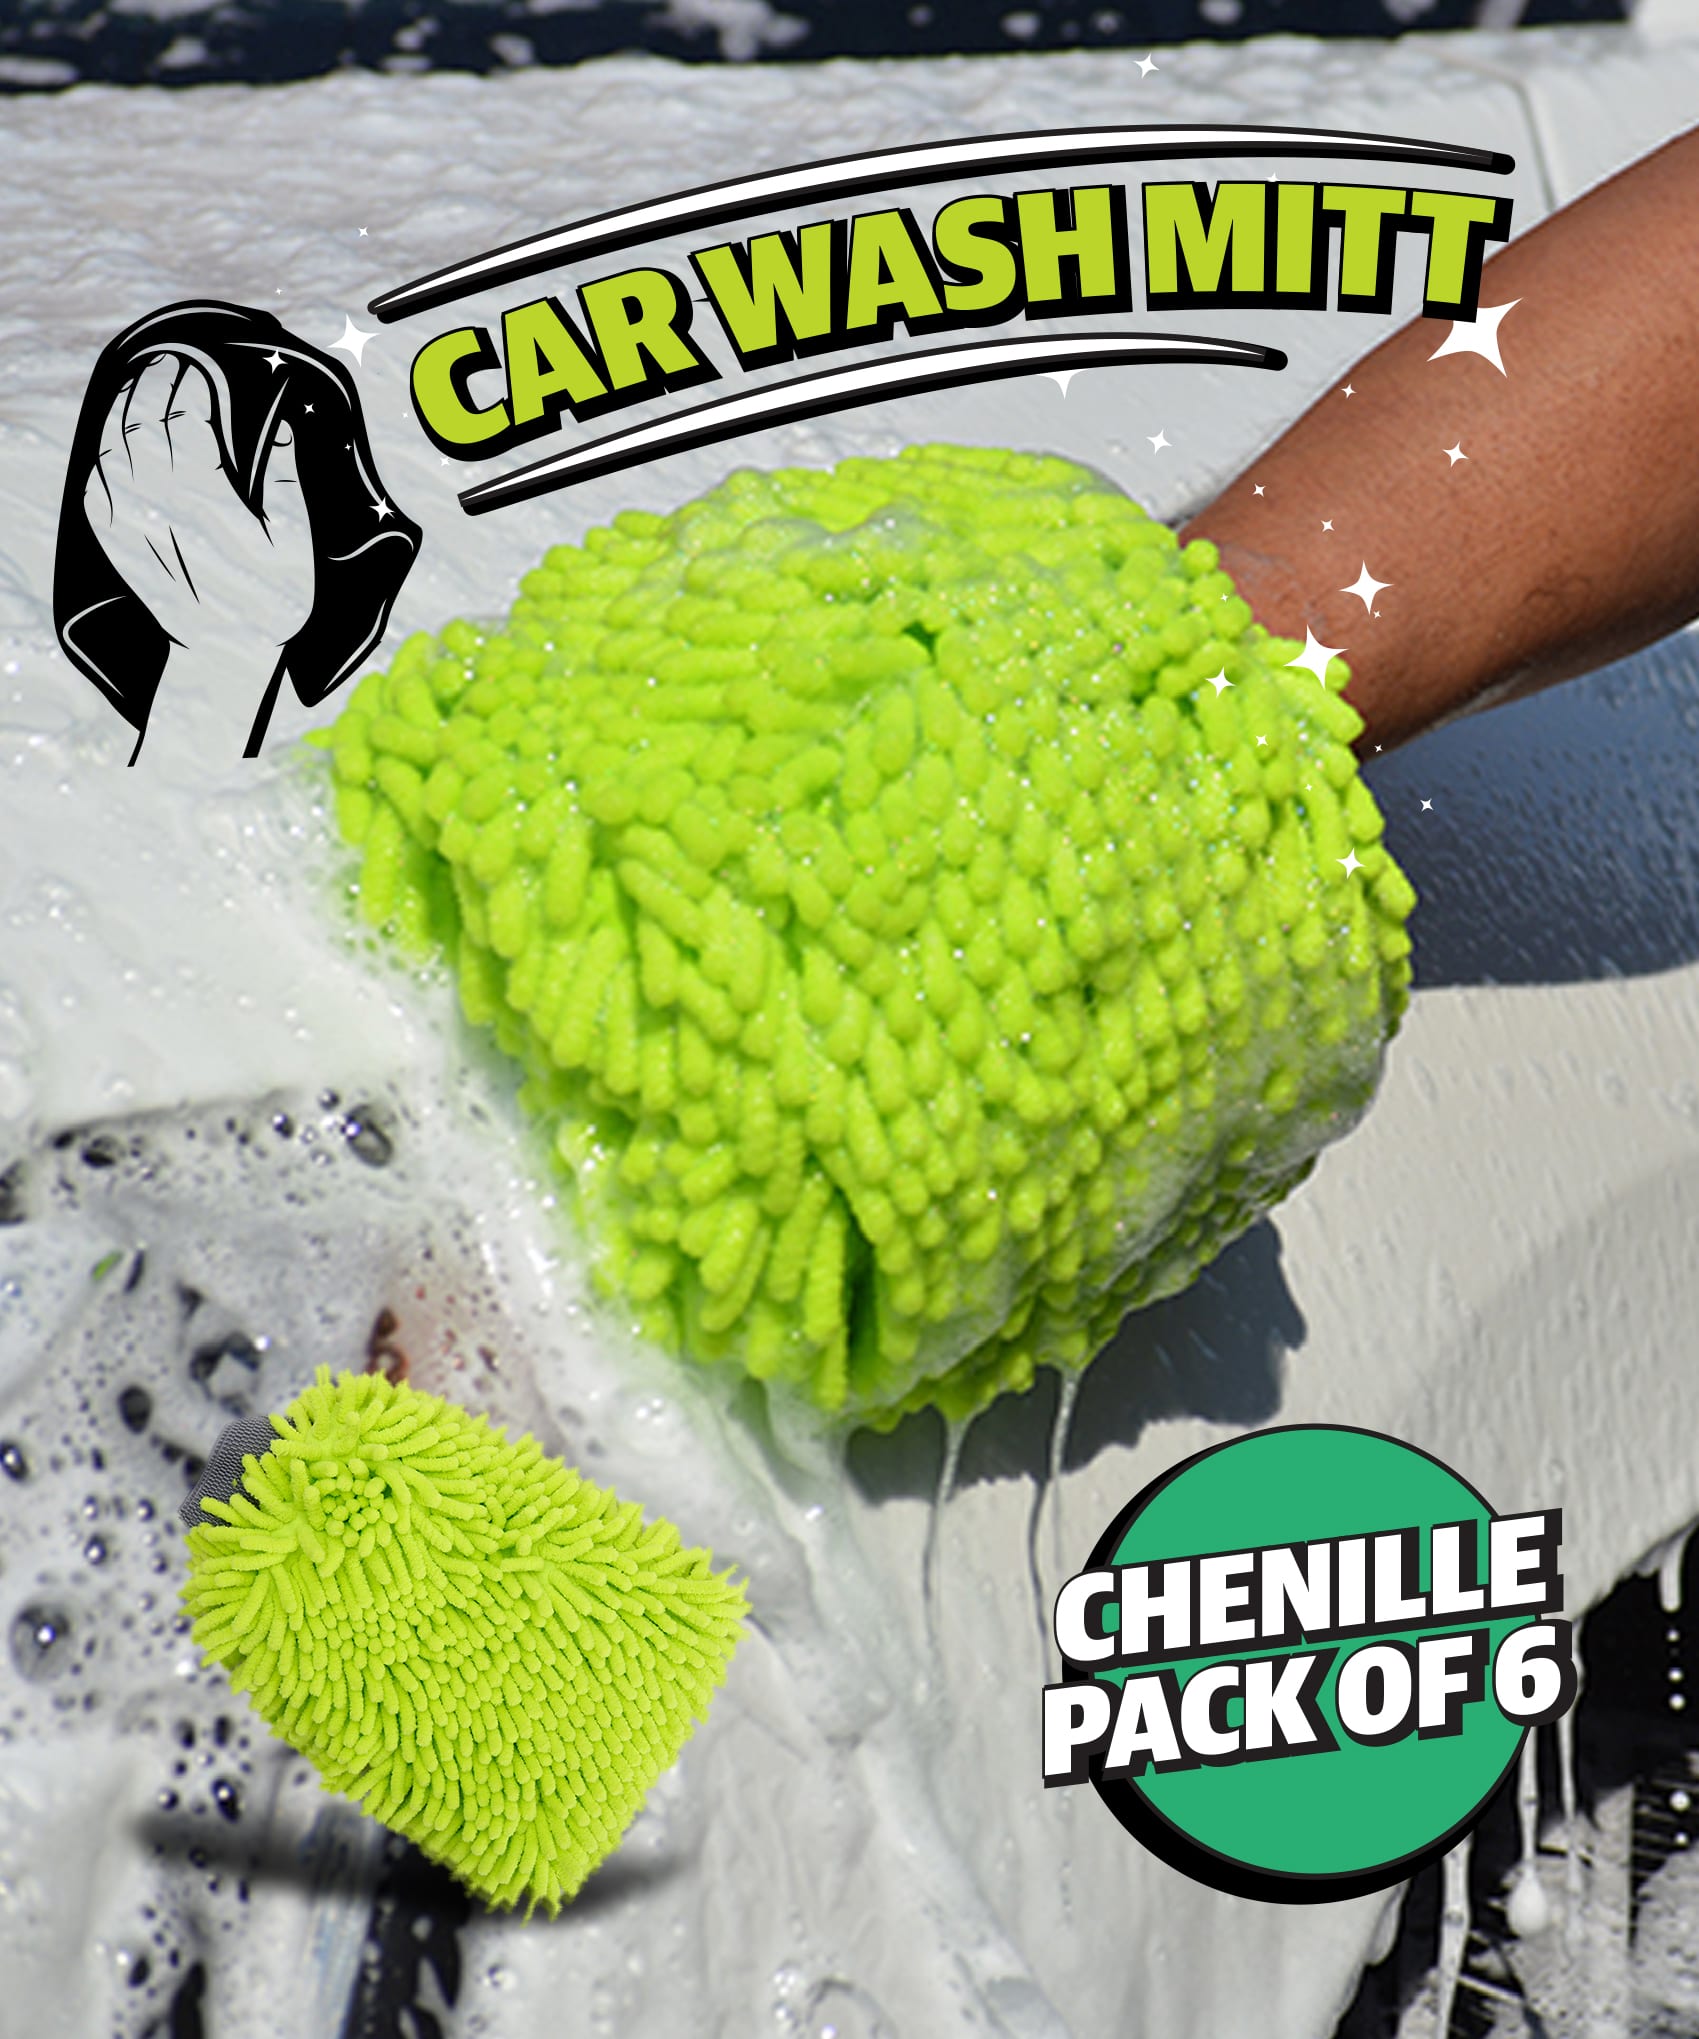 Microfiber Chenille Wash Mitt, Green, Each or Pack of 6